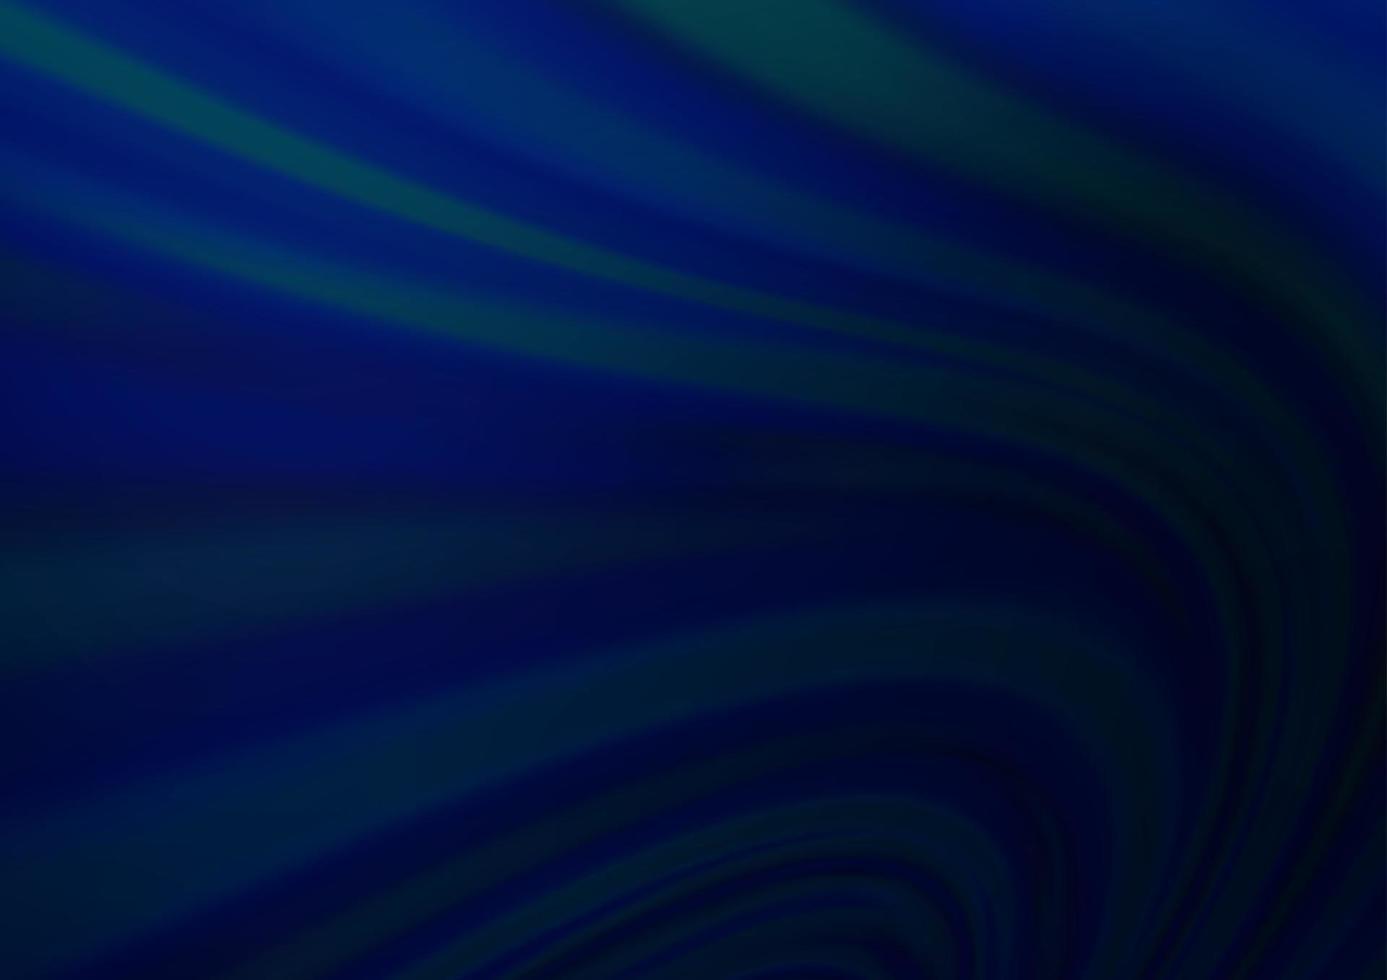 Dark BLUE vector pattern with liquid shapes.